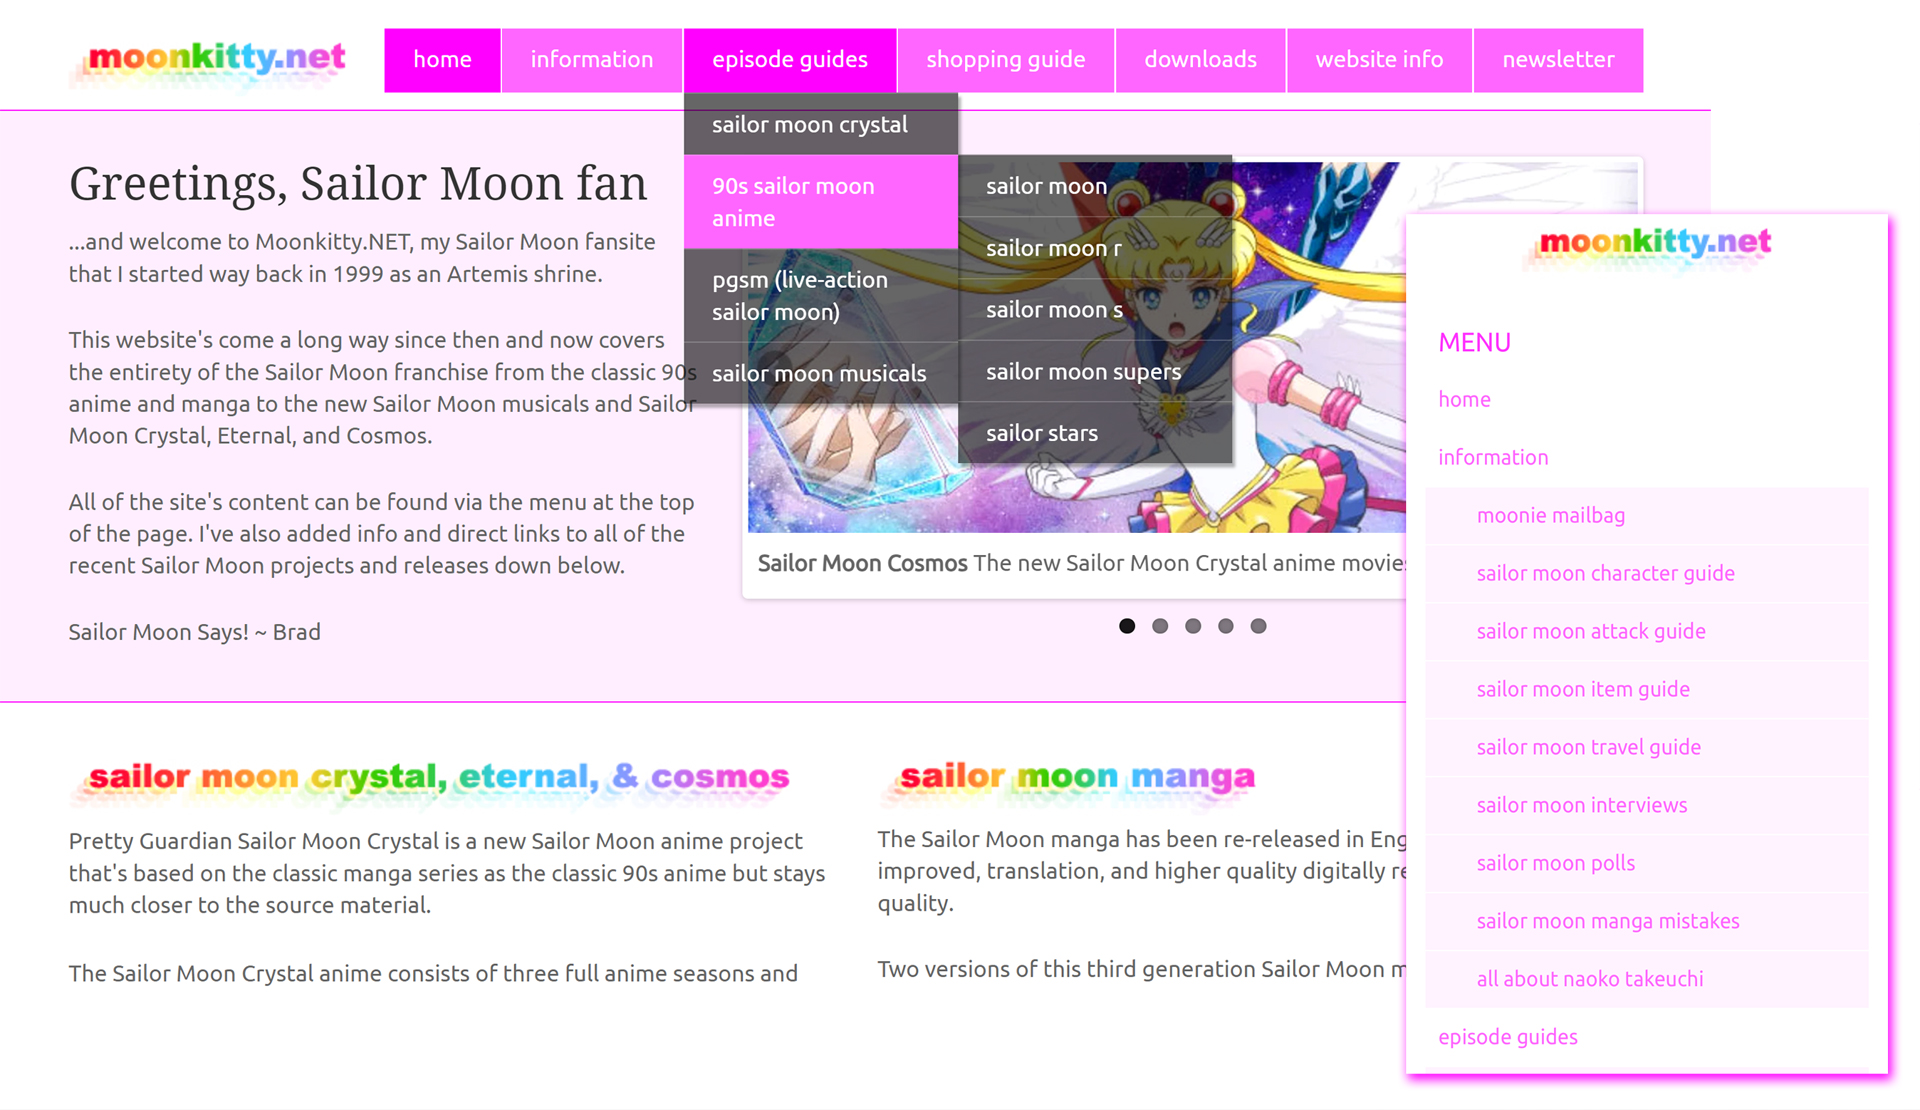 Moonkitty.NET's current website layout created in 2023 for both mobile and desktop.